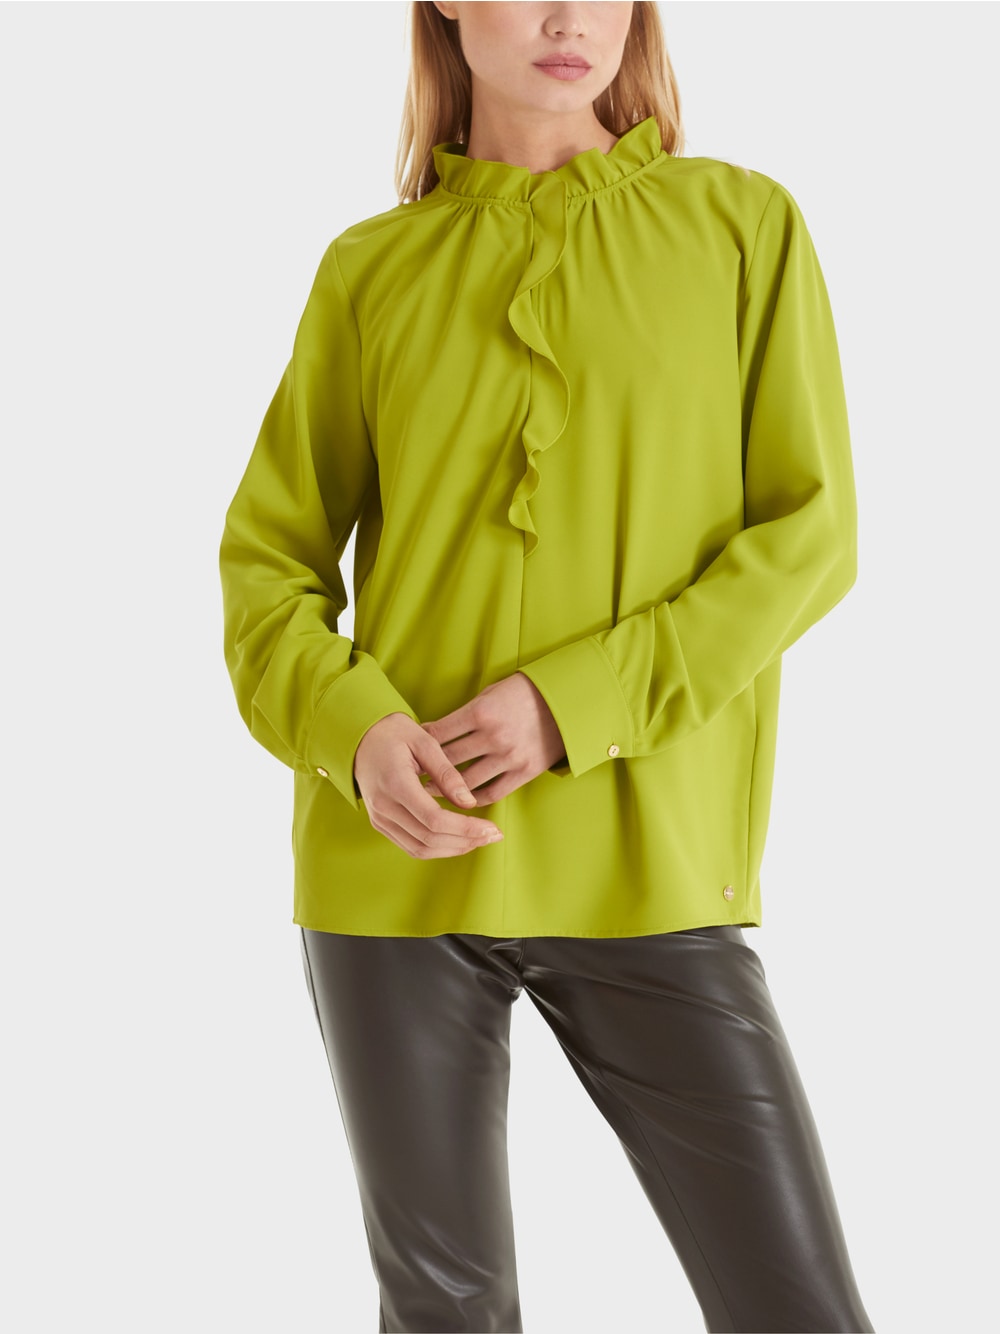 olive green flowing blouse